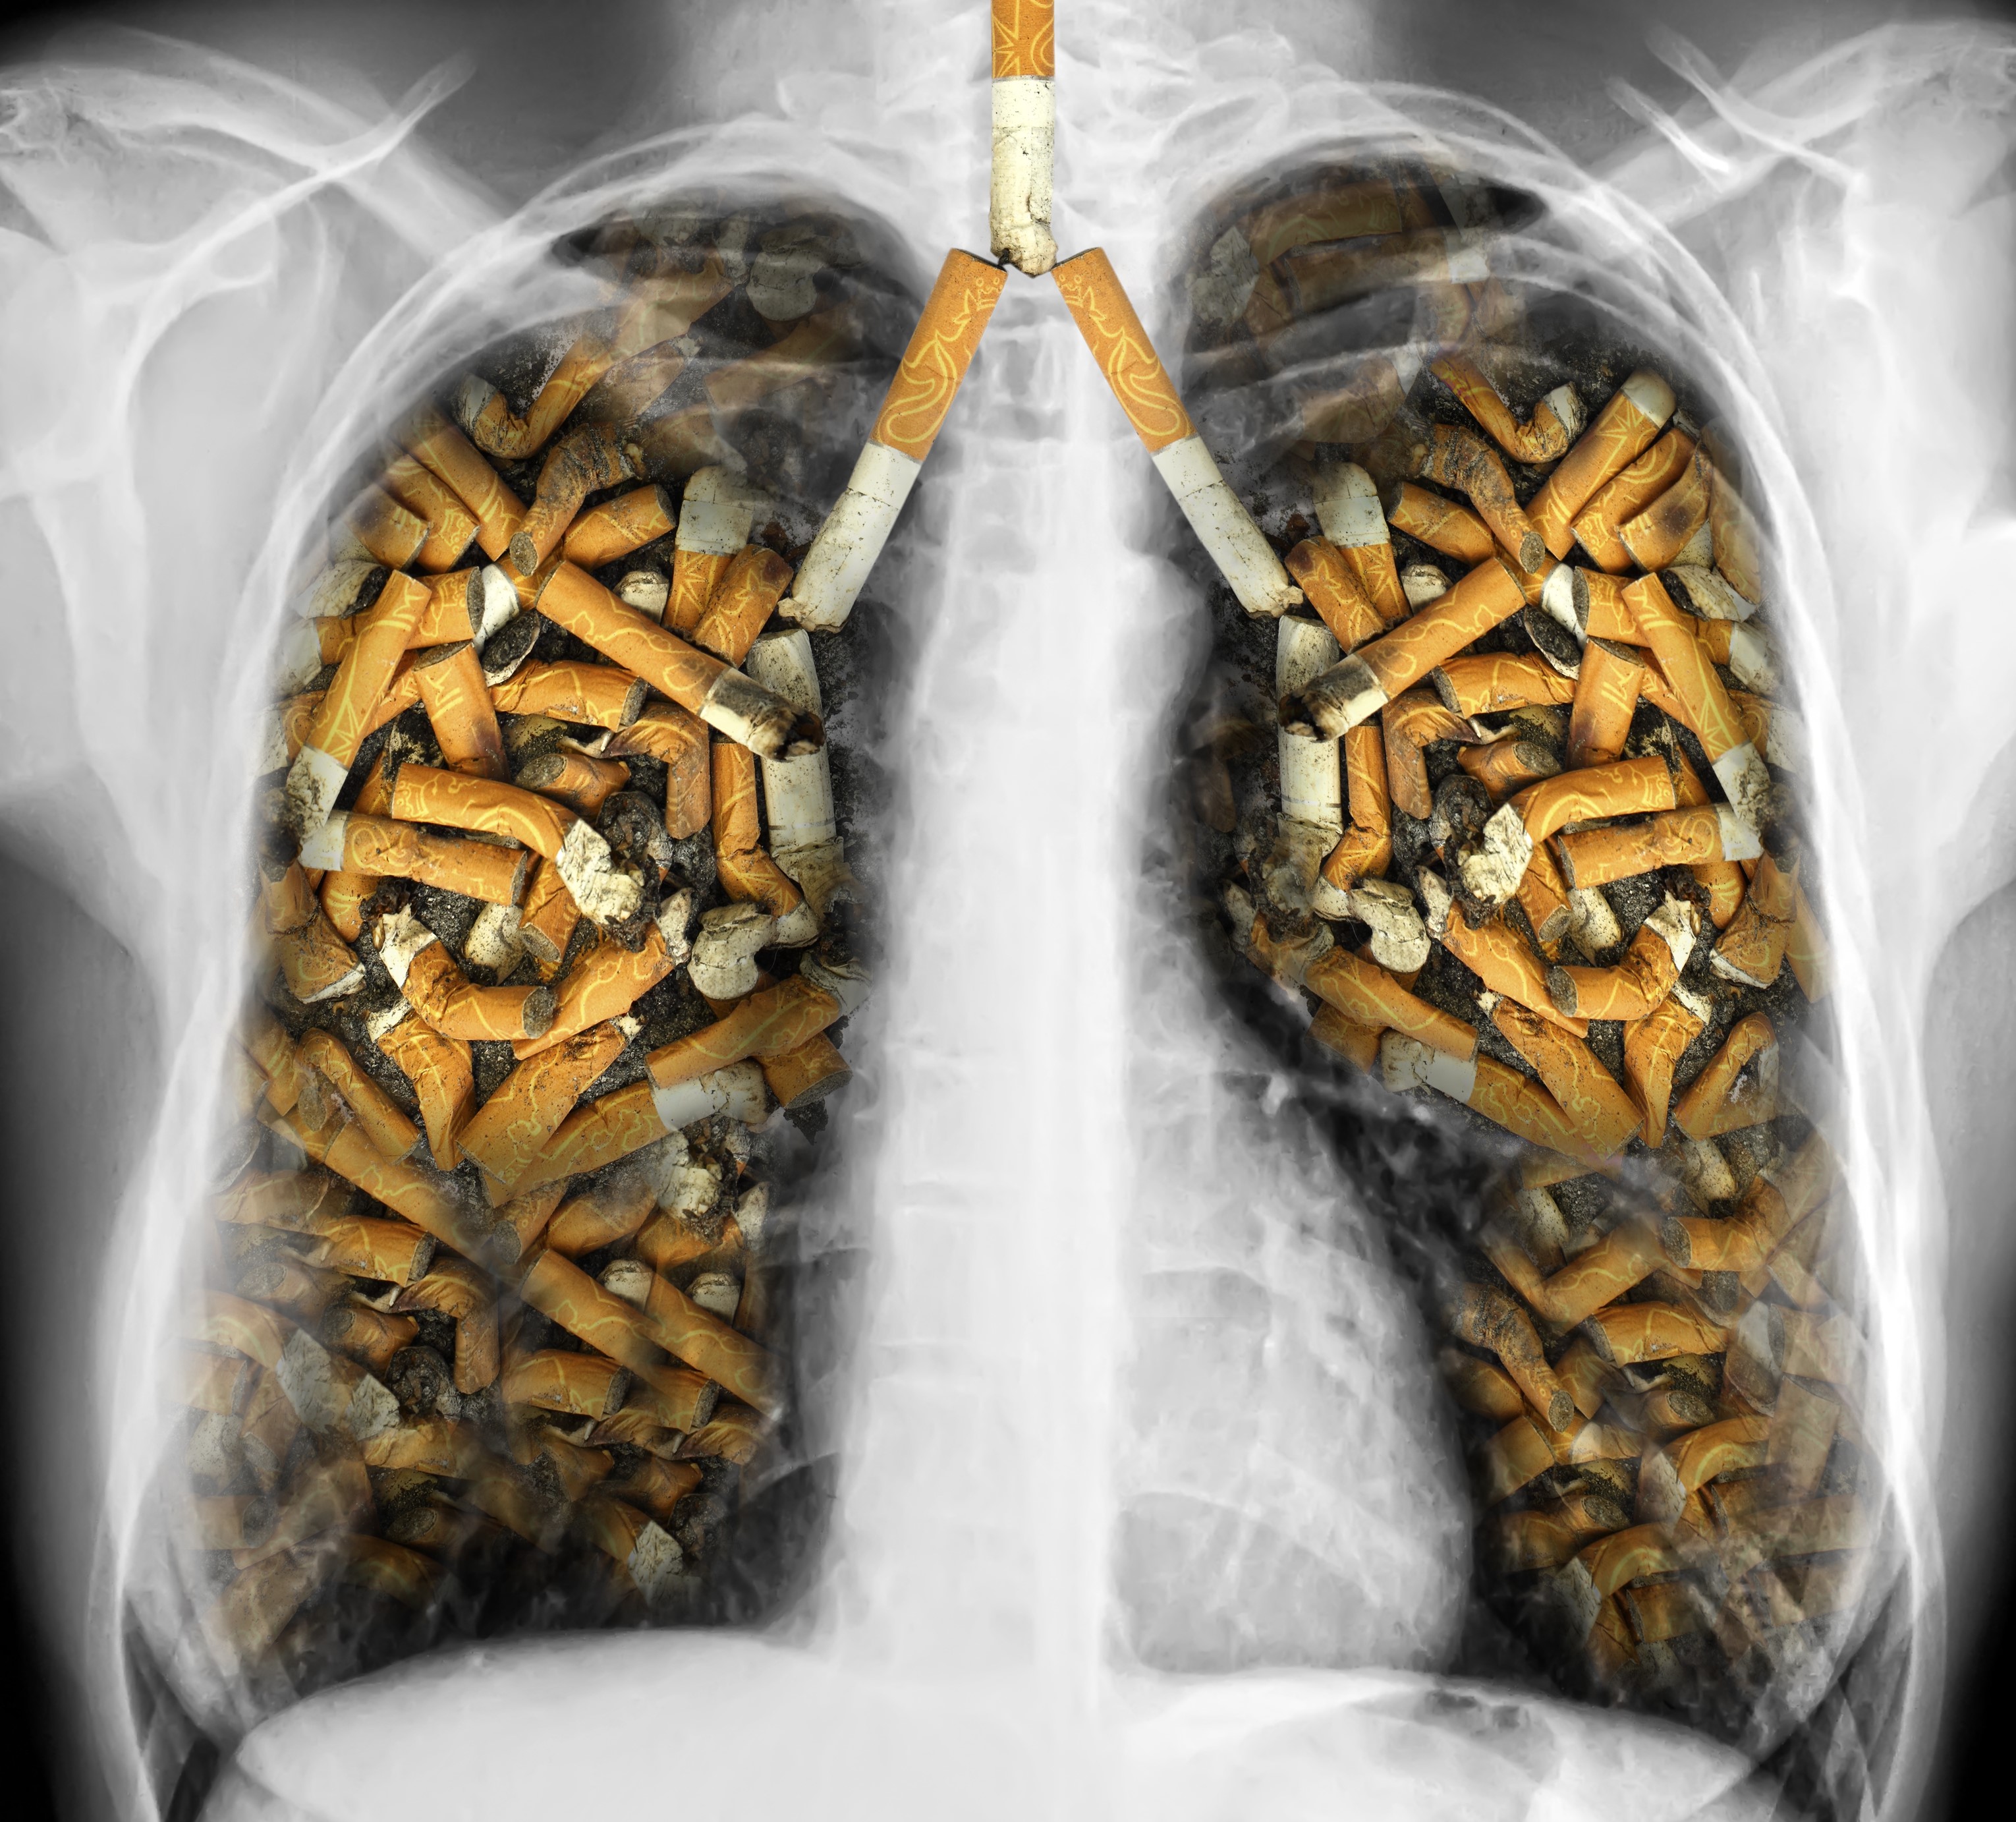 A picture of an x-ray showing cigarettes in the lungs.